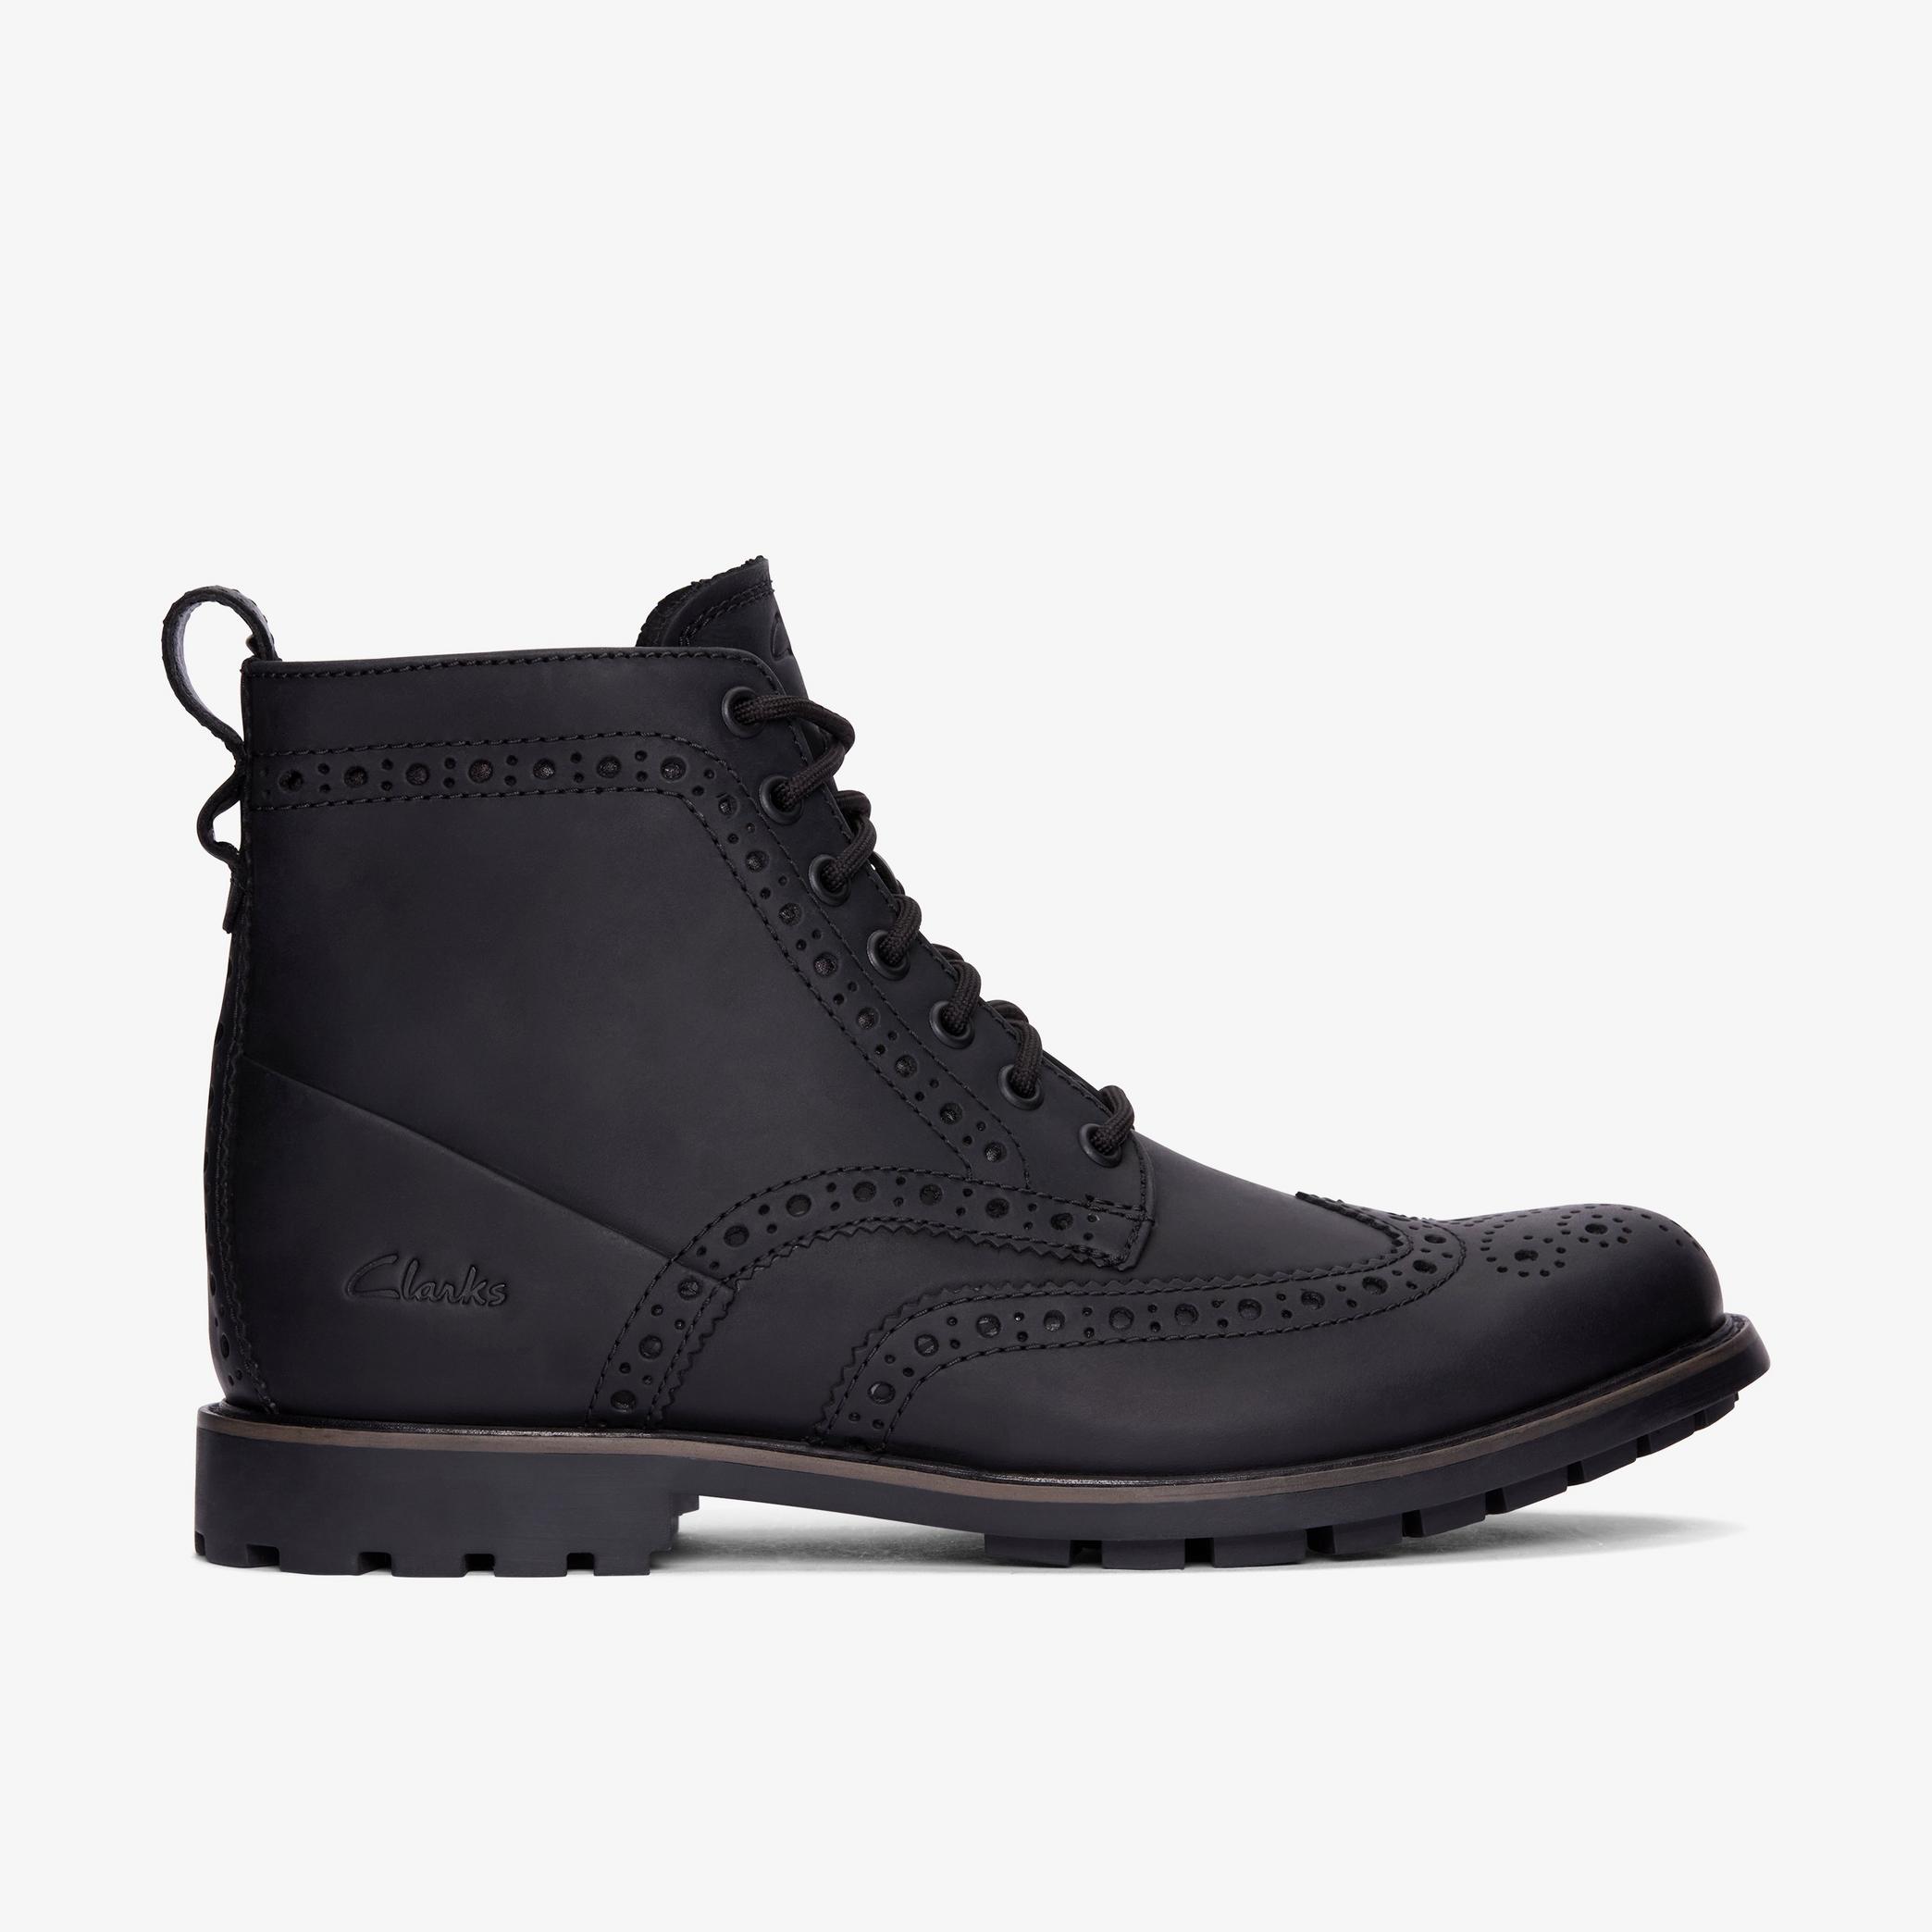 Westcombe Limit Black Warmlined Leather Ankle Boots, view 1 of 6